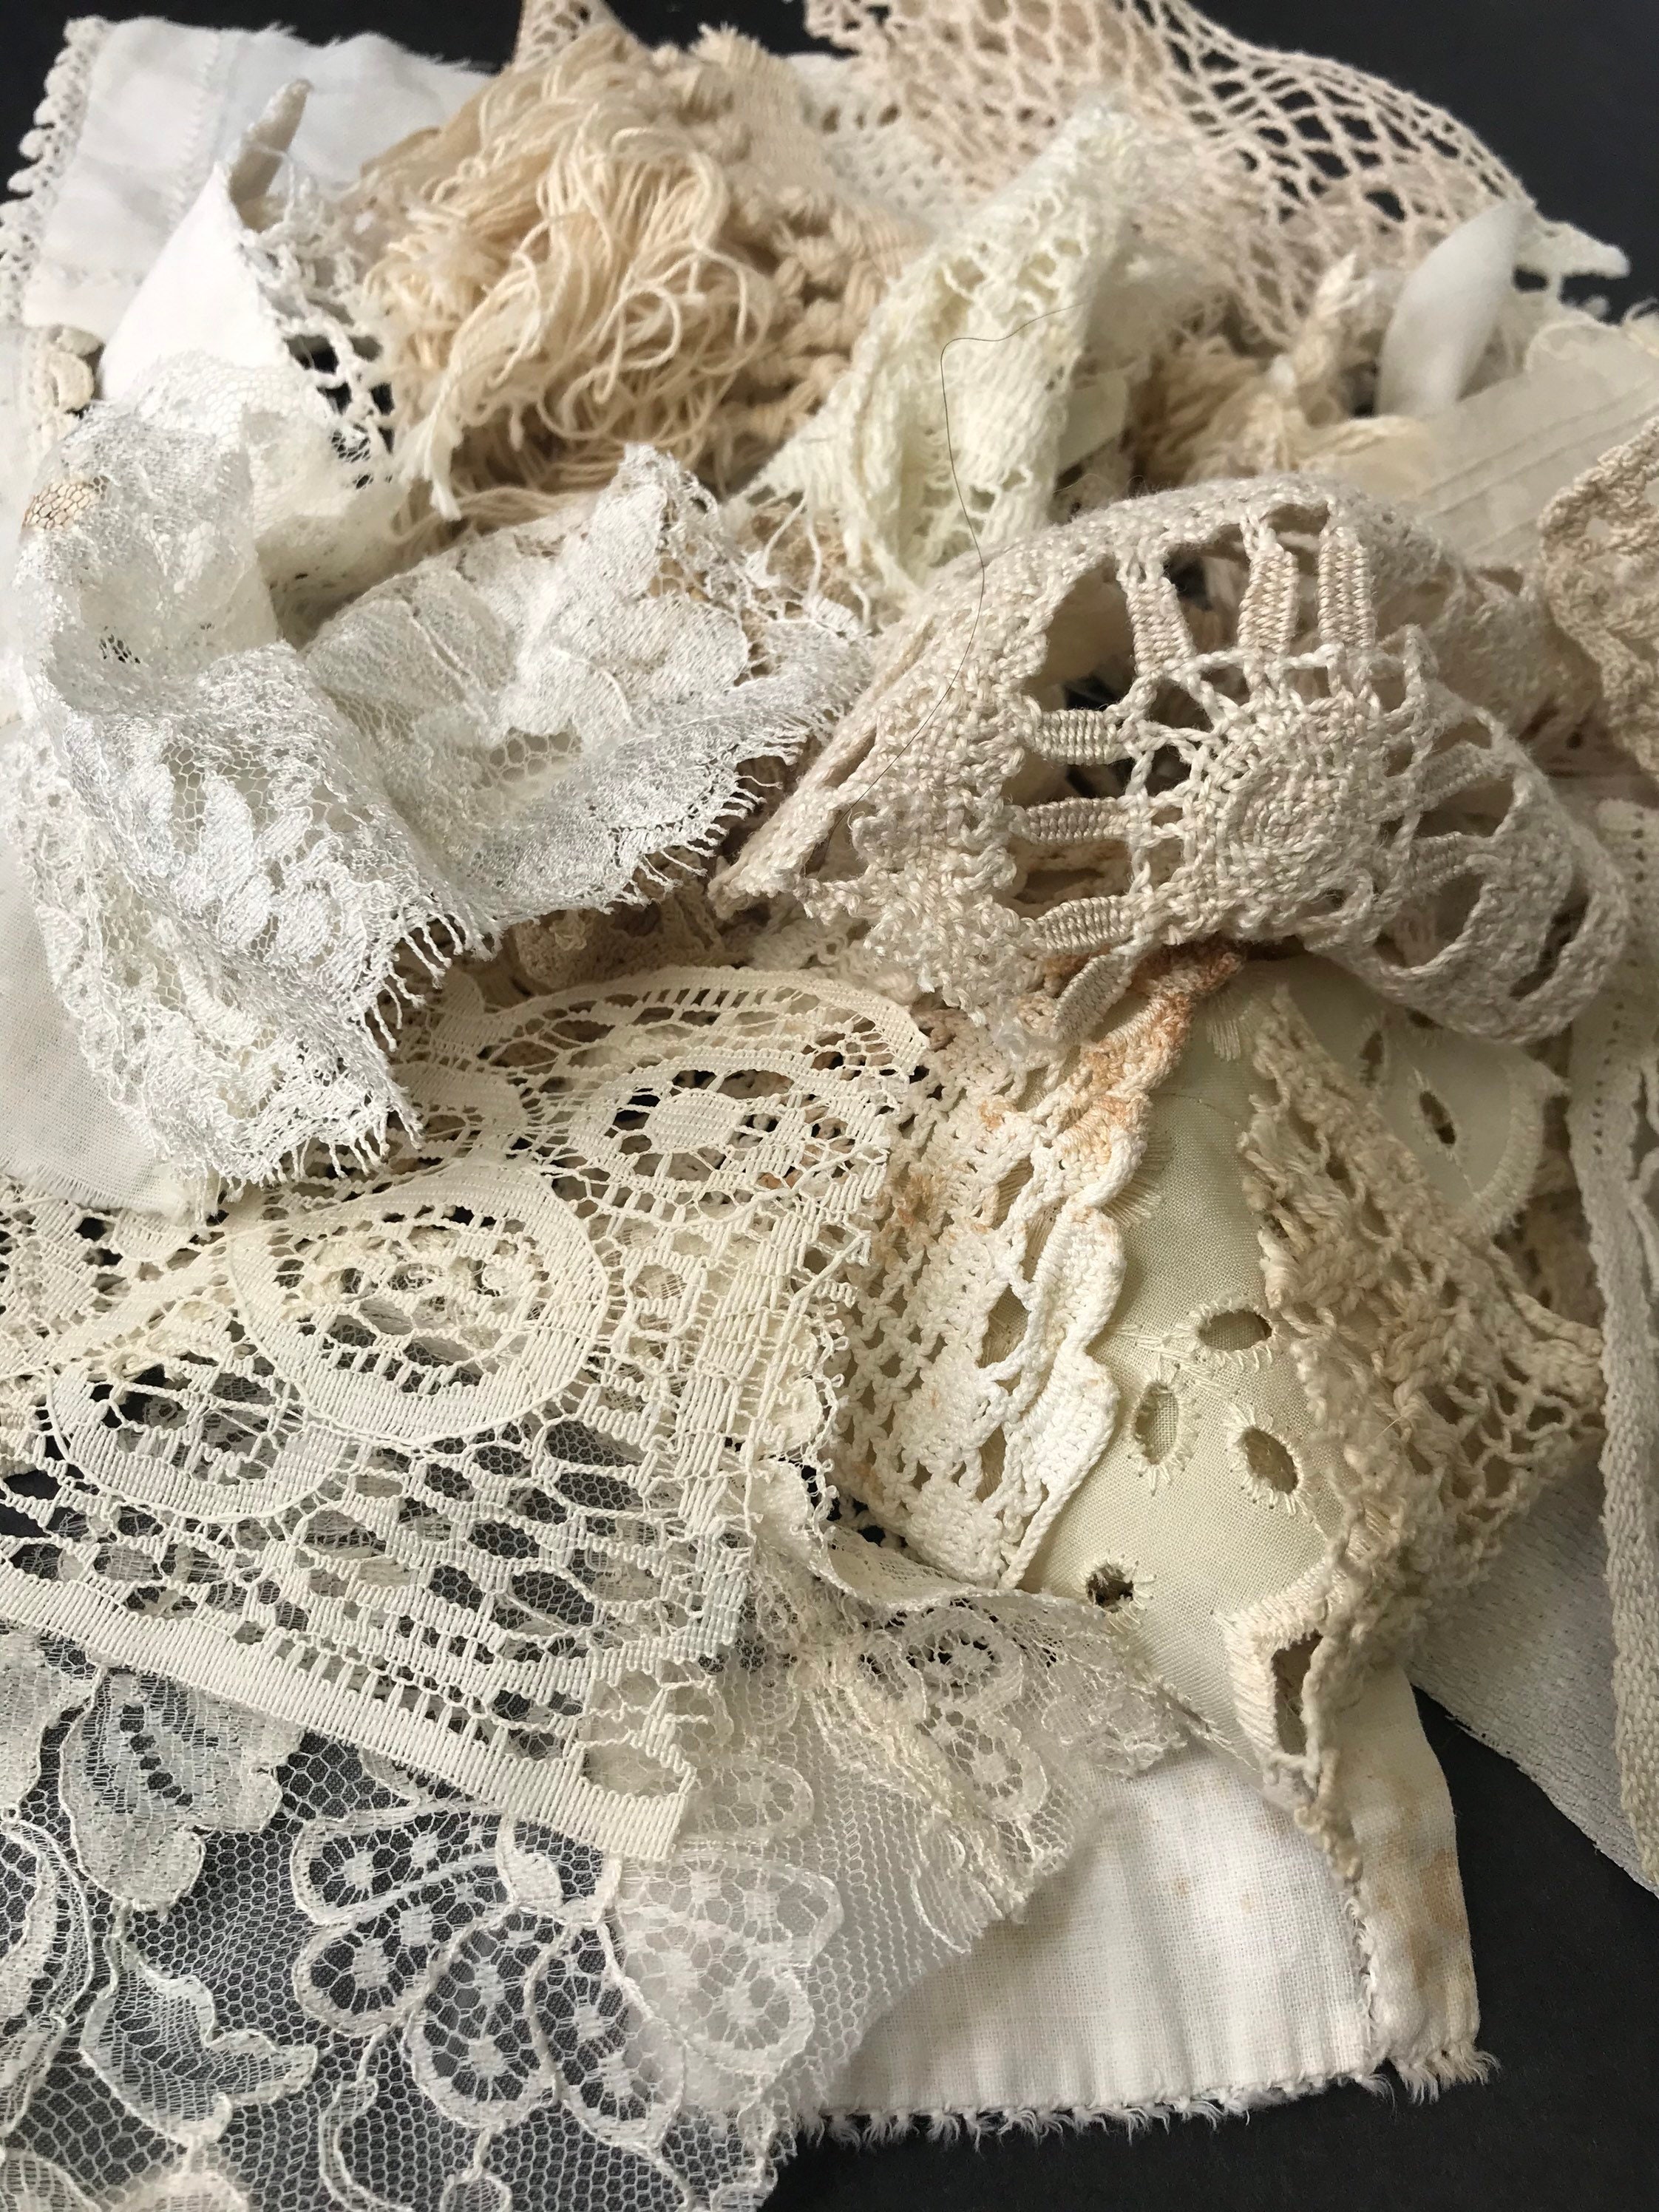 Vintage Lace Pieces Mixed Media Grab Bag Texture Fabric Lot | Etsy